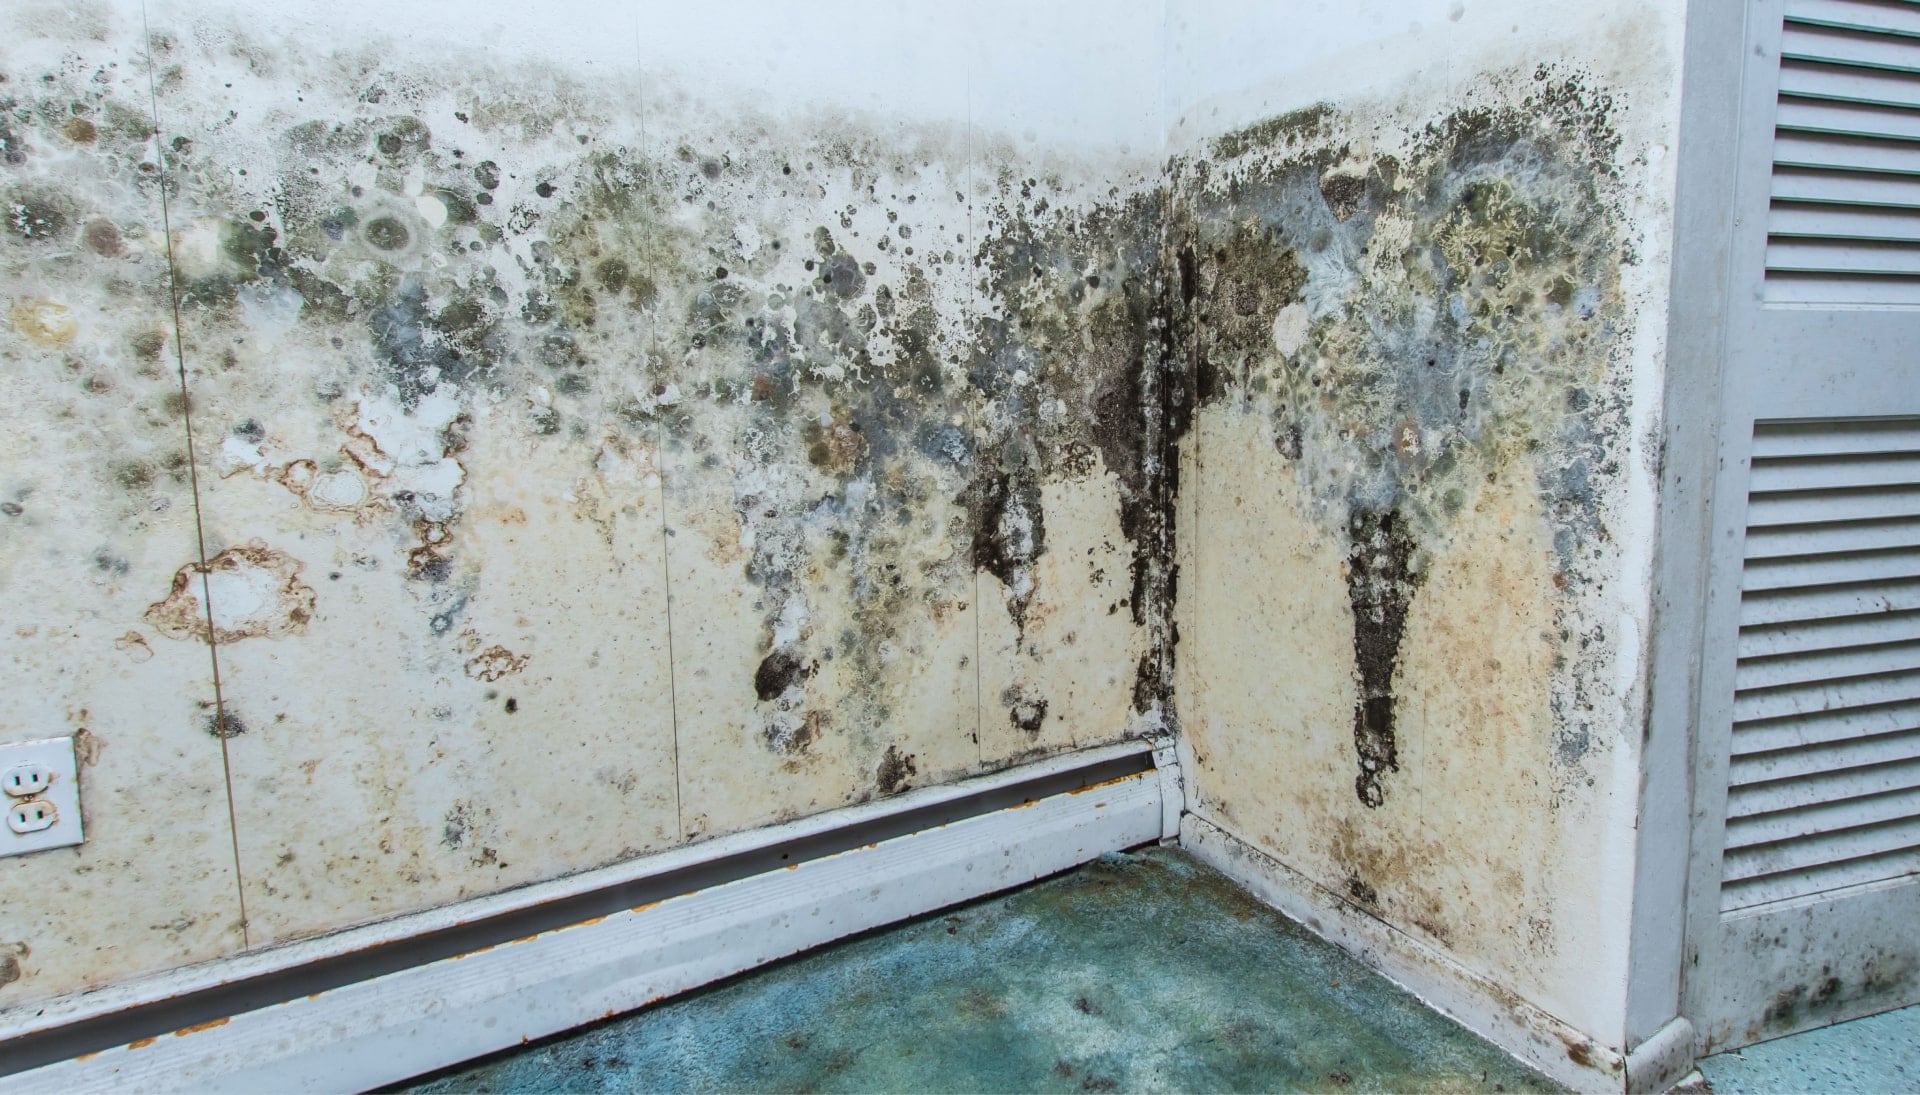 A mold remediation team using specialized techniques to remove mold damage and control odors in a Albuquerque property, with a focus on safety and efficiency